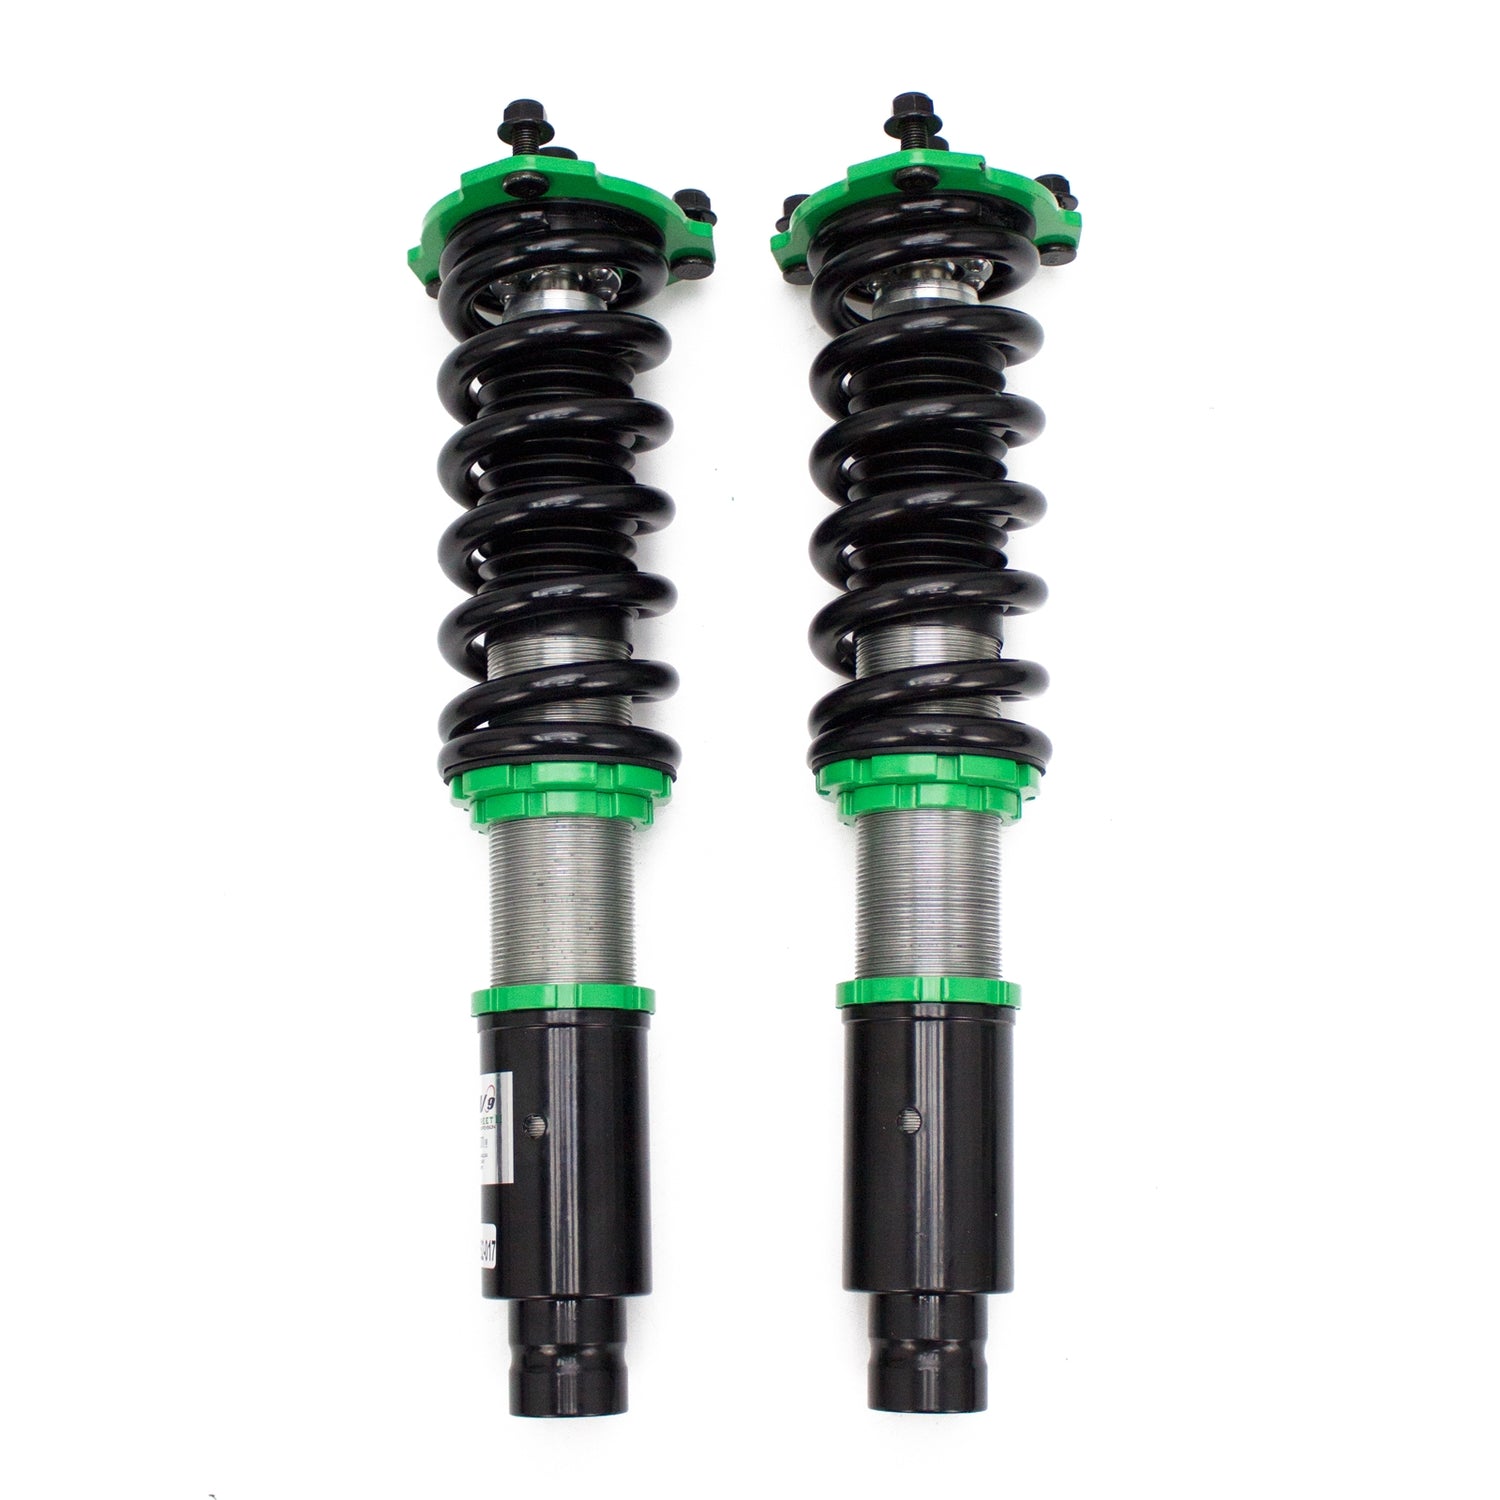 R9-HS2-017_2, Mtisubishi Galant 94-99 Hyper-Street II Coilover Suspension Lowering Kit, Mono-Tube Shock w/ 32 Click Rebound Setting, Full Length Adjustable